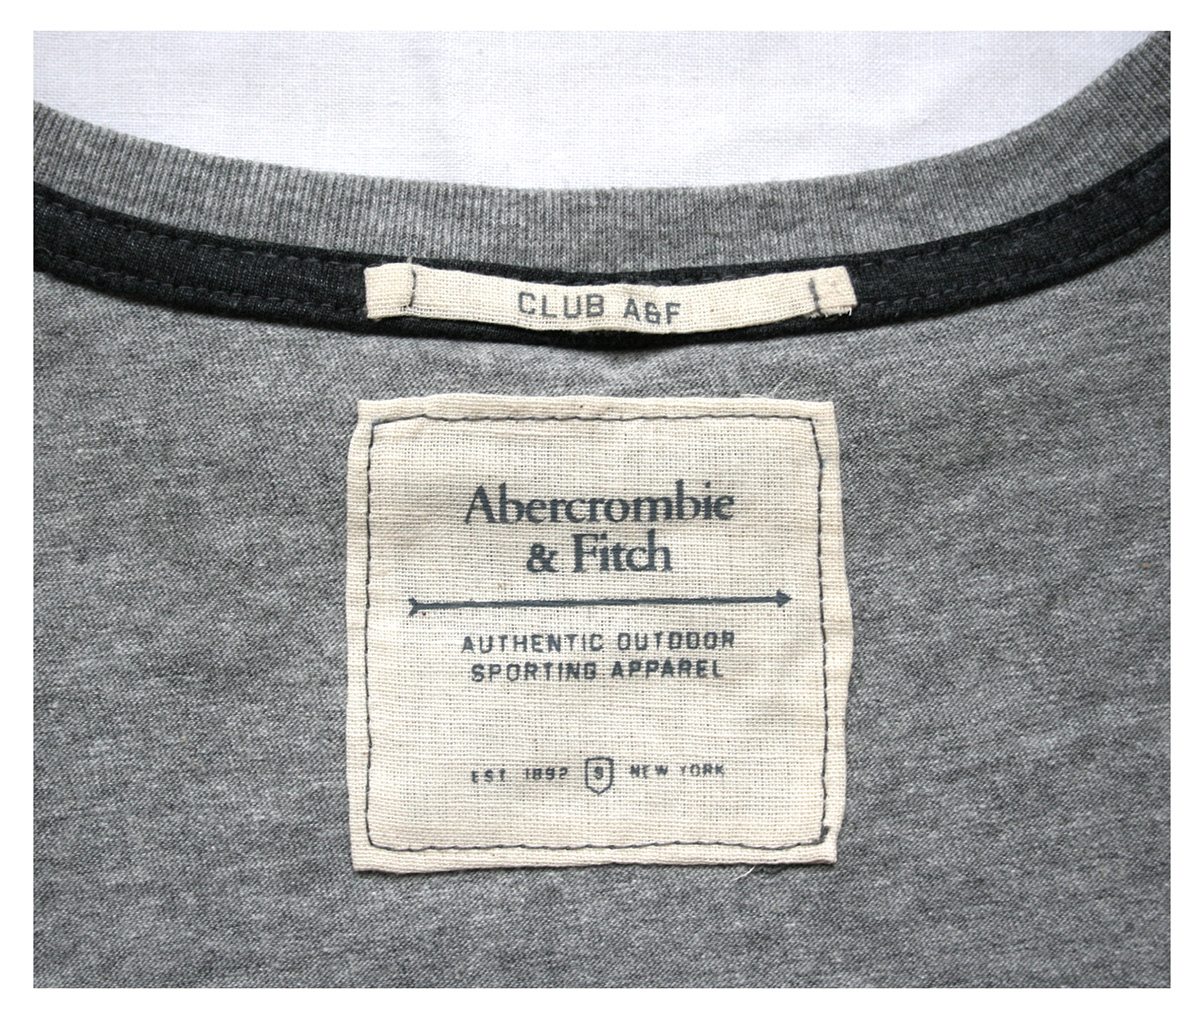 A&F abercrombie Abercrombie & Fitch back to school T-Shirt Design look book